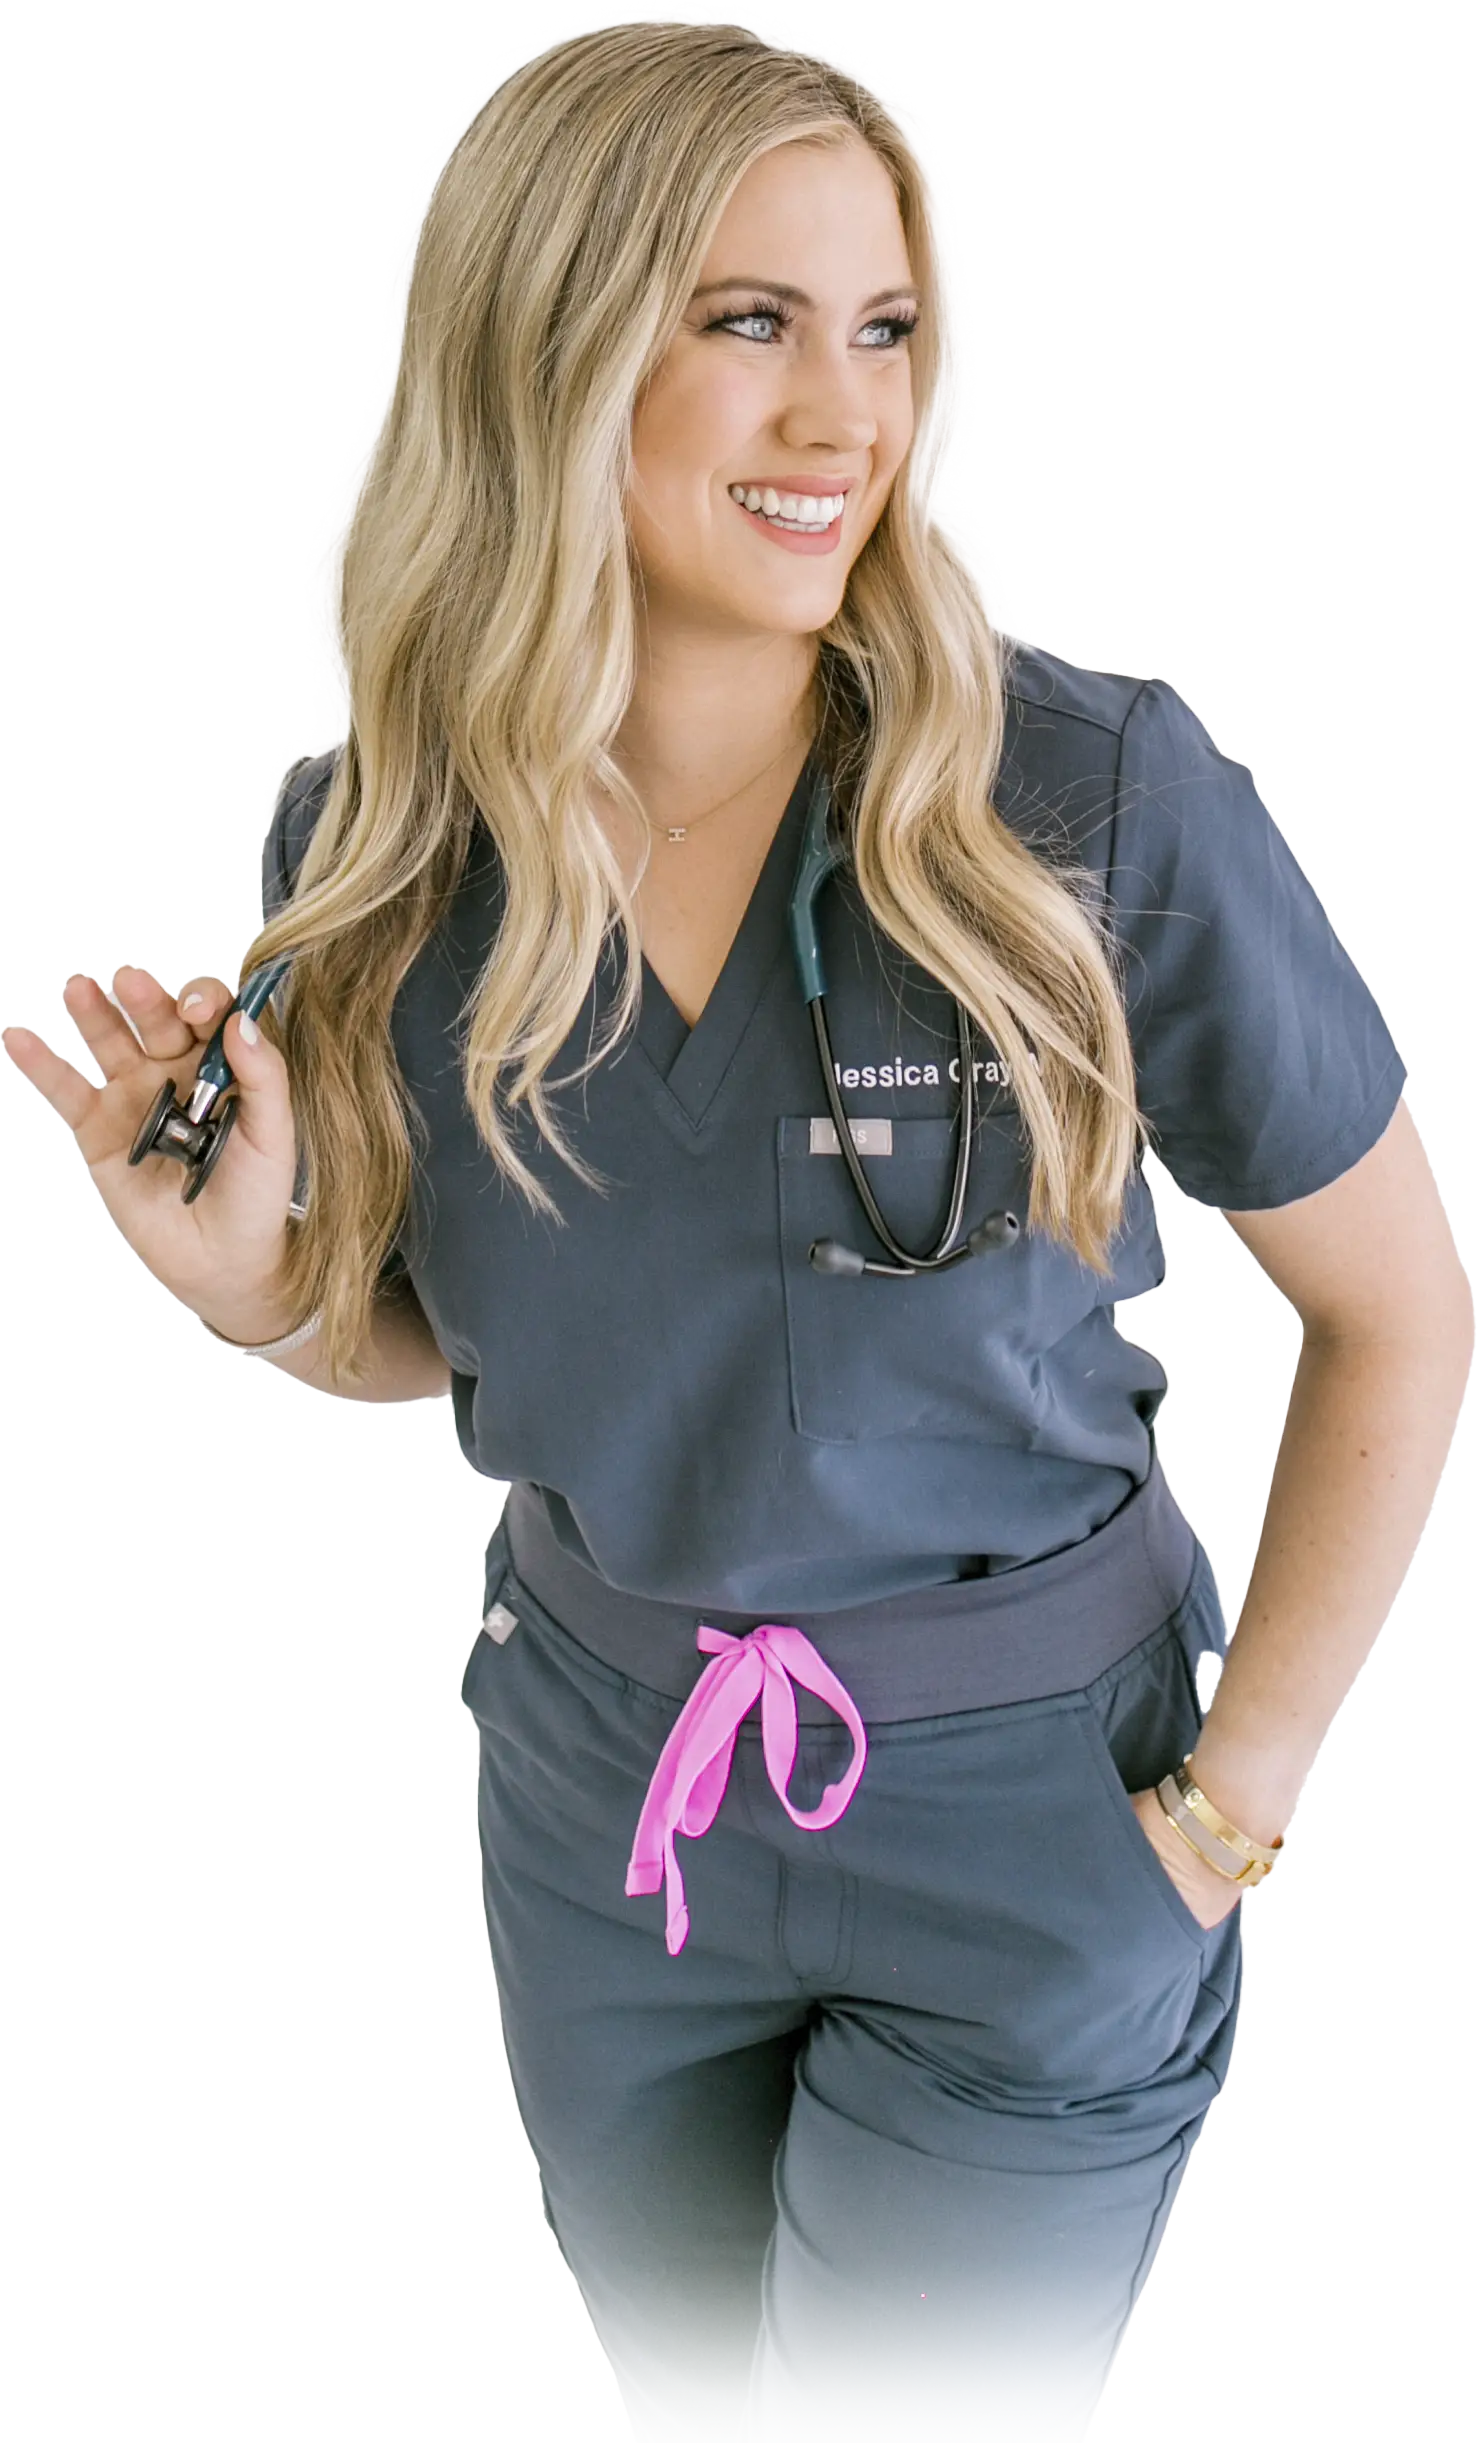 Jessica Gray, MD posing in scrubs with stethoscope